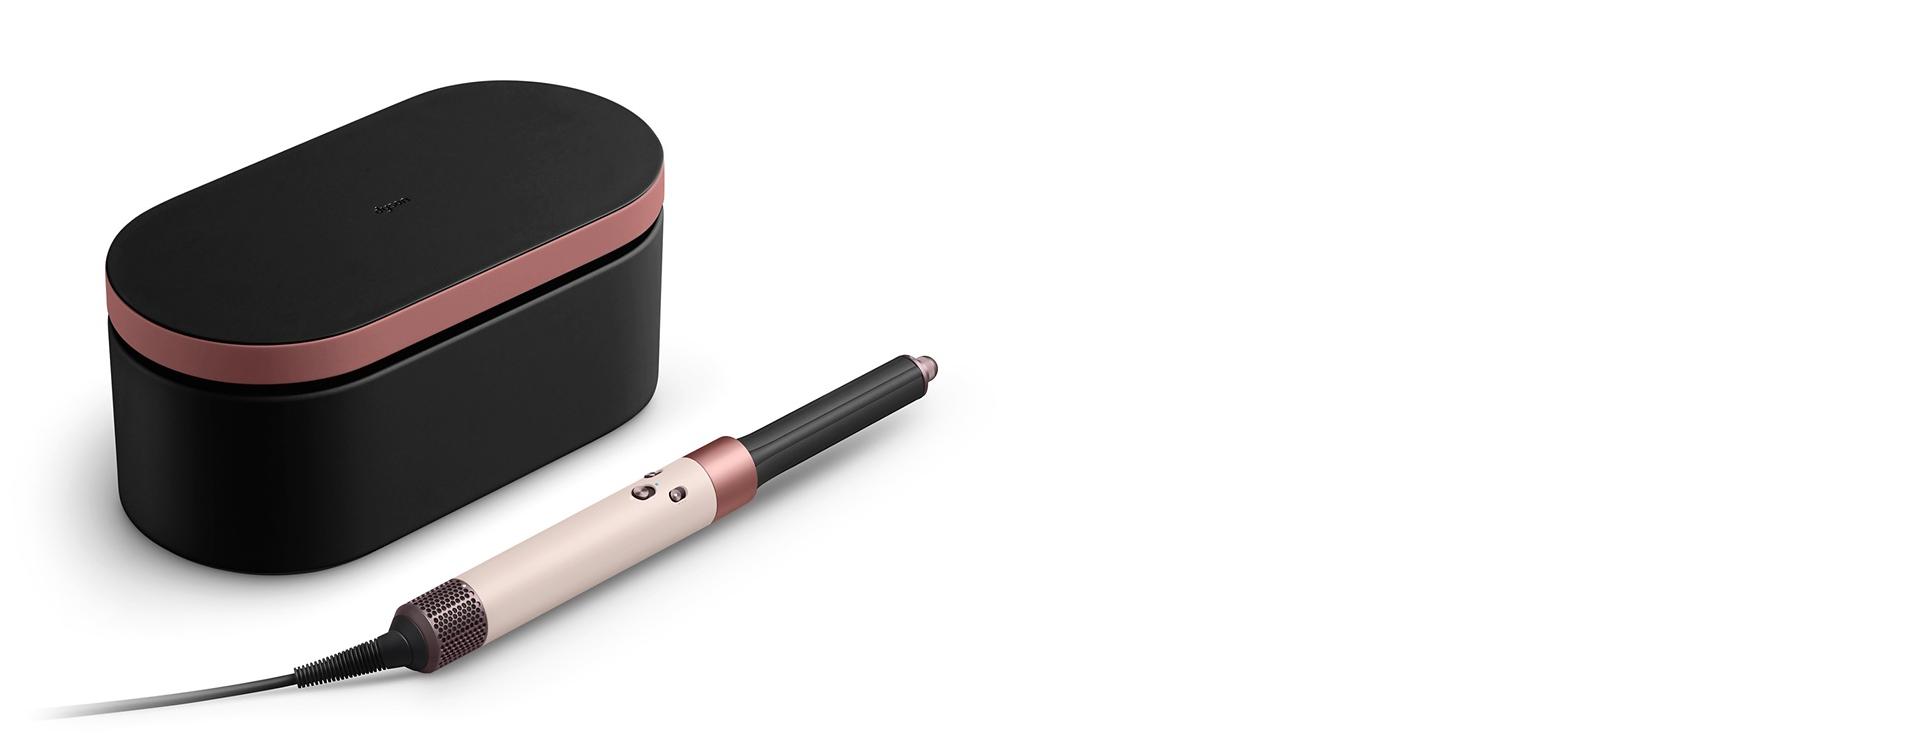 Dyson Airwrap multi-styler and dryer with presentation case in Ceramic pink and rose gold.